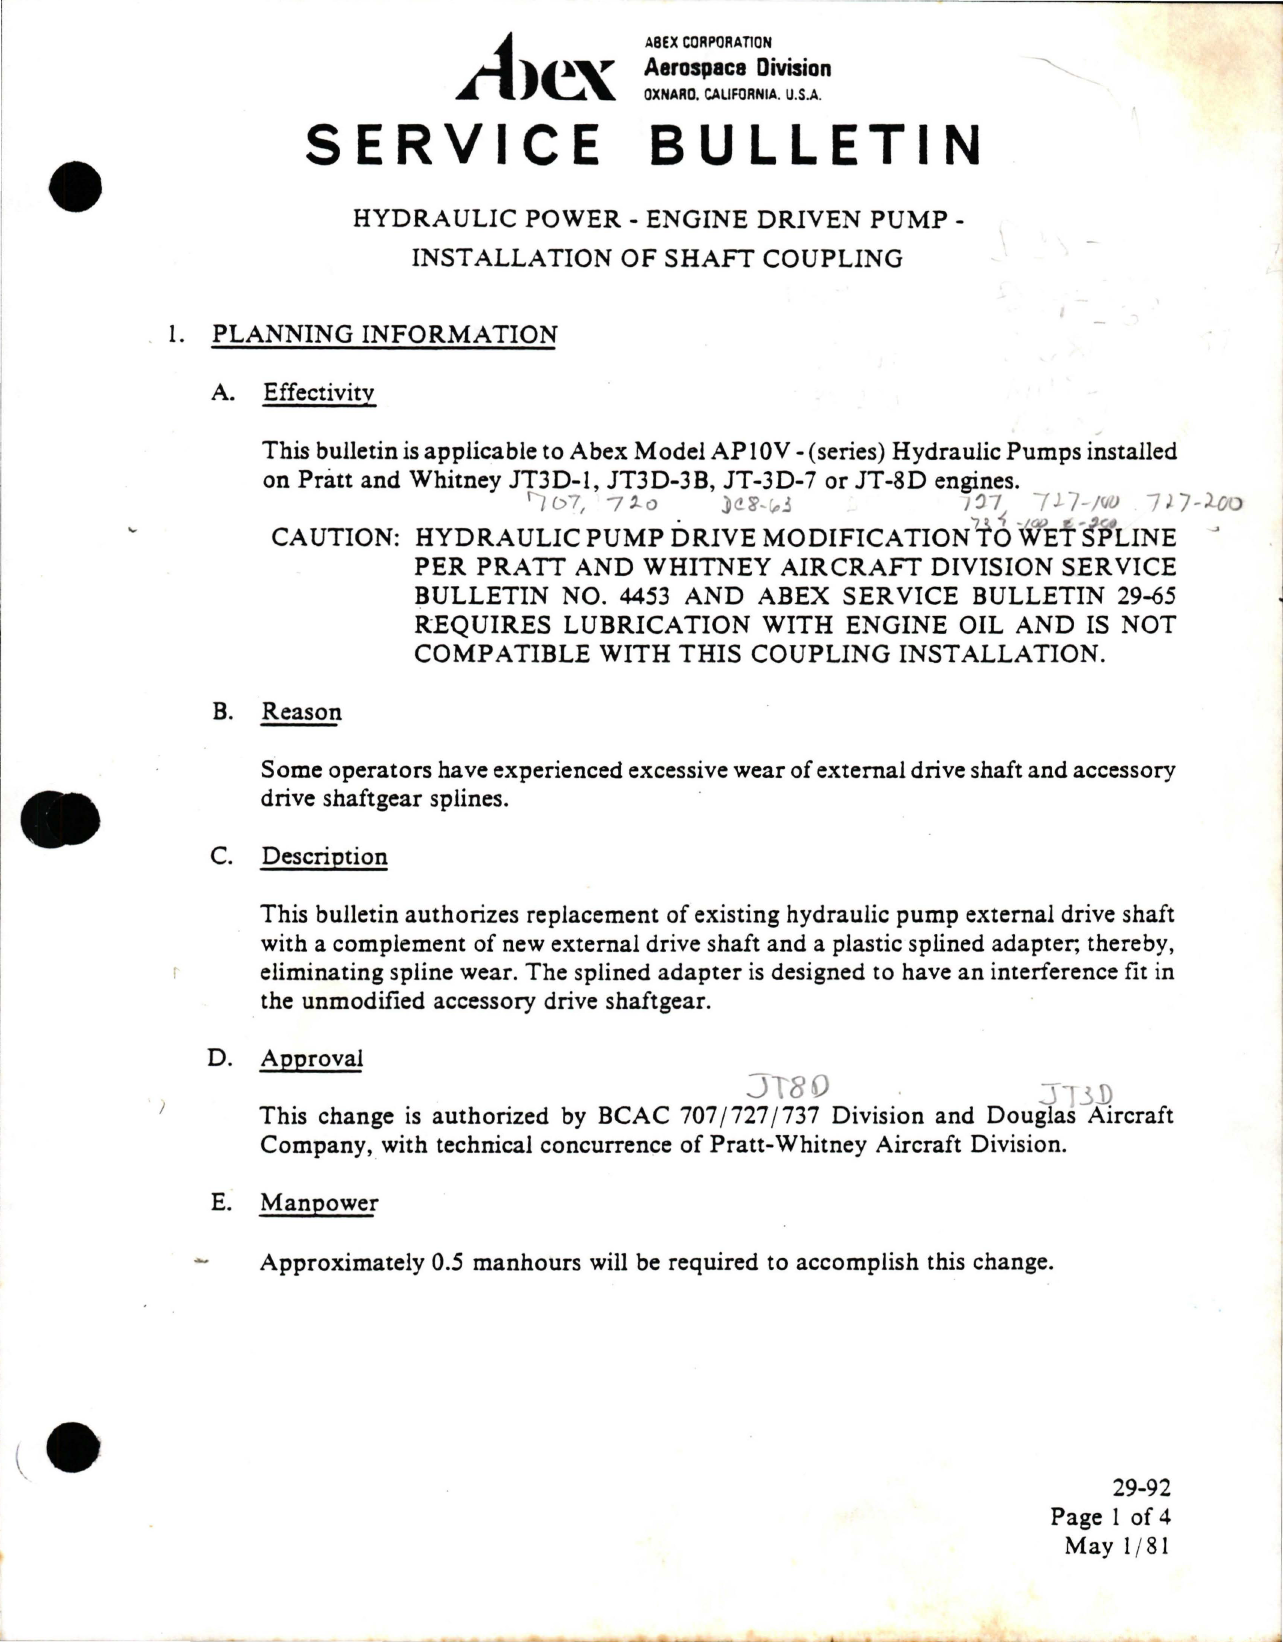 Sample page 1 from AirCorps Library document: Installation of Shaft Coupling for Hydraulic Pump